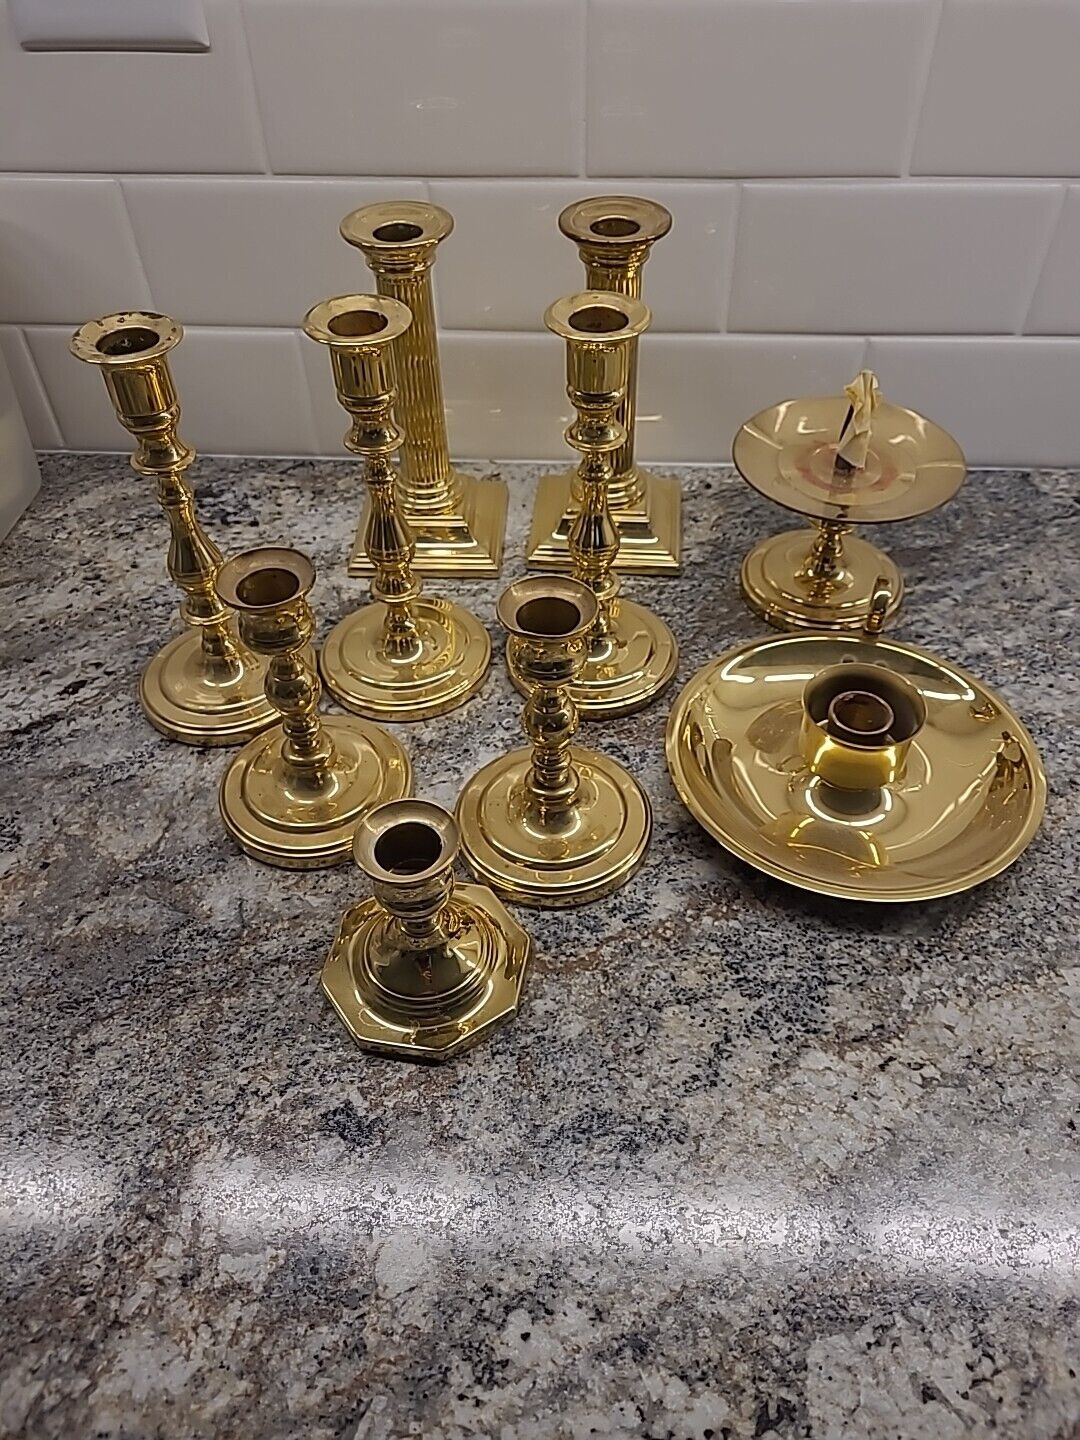 Lot of  10 BALDWIN BRASS Candlesticks. 3 pairs. All in  nice condition 